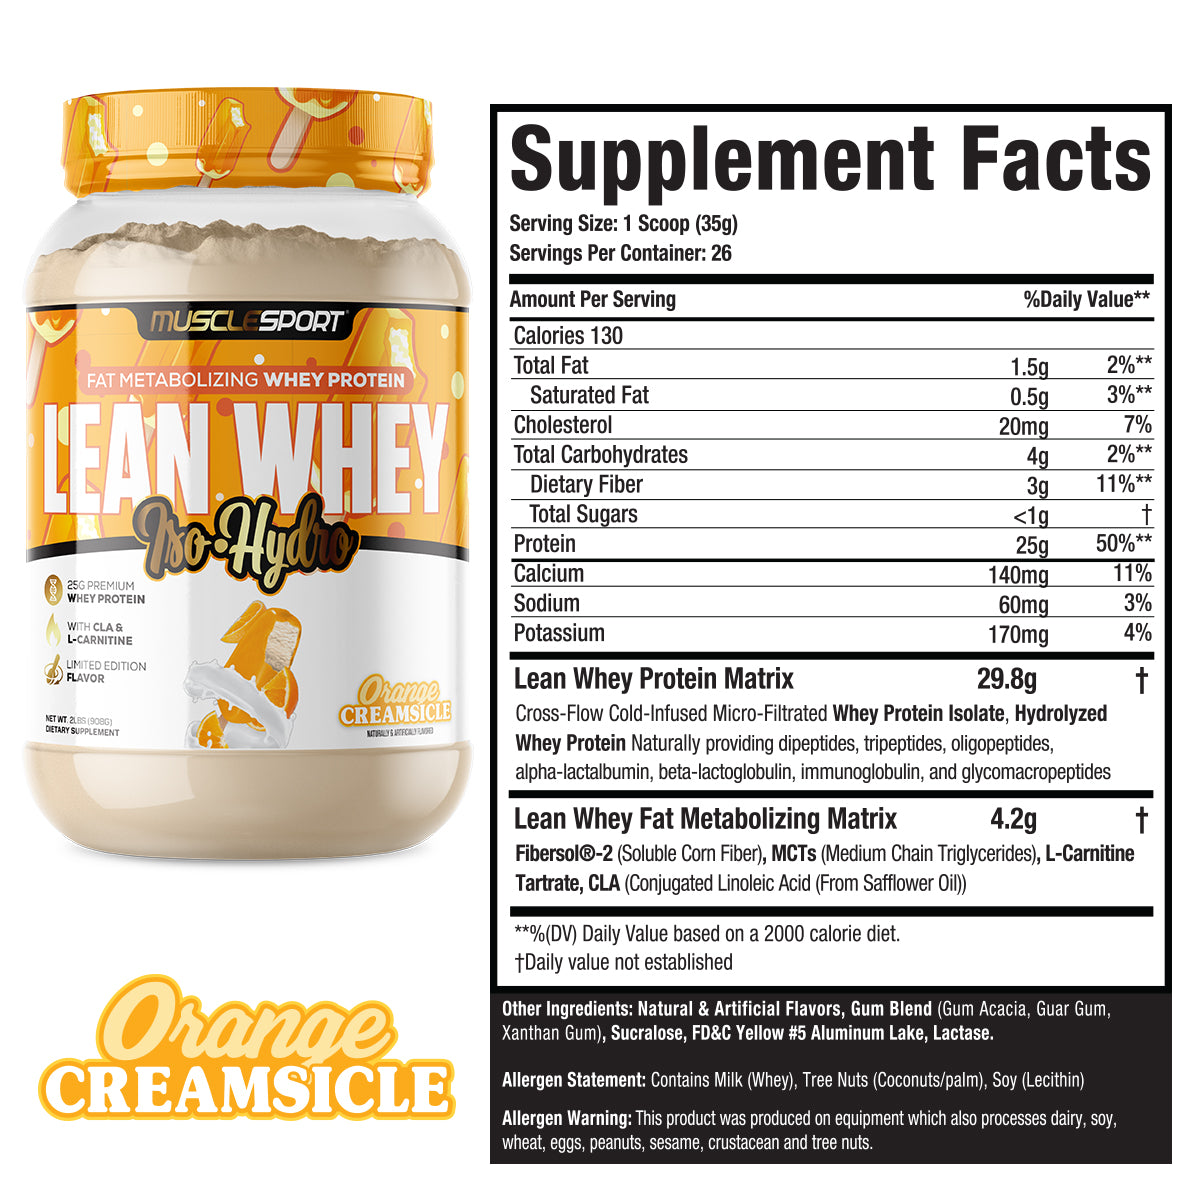 Orange Creamsicle Lean Whey Supplement Facts